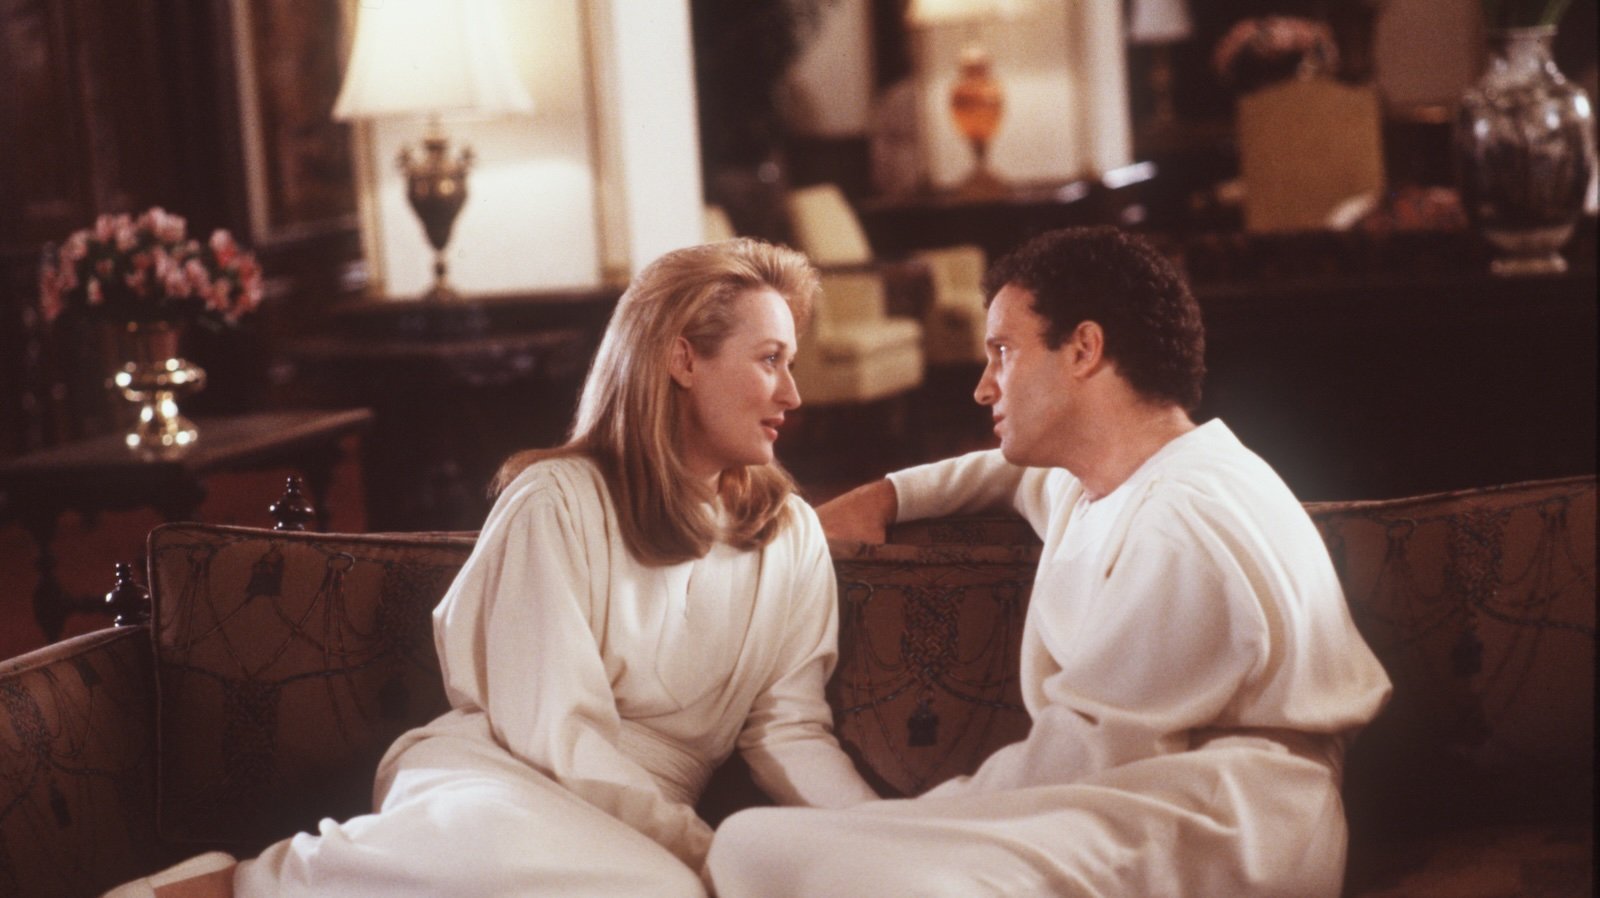 A man and woman in matching white robes sit on a couch